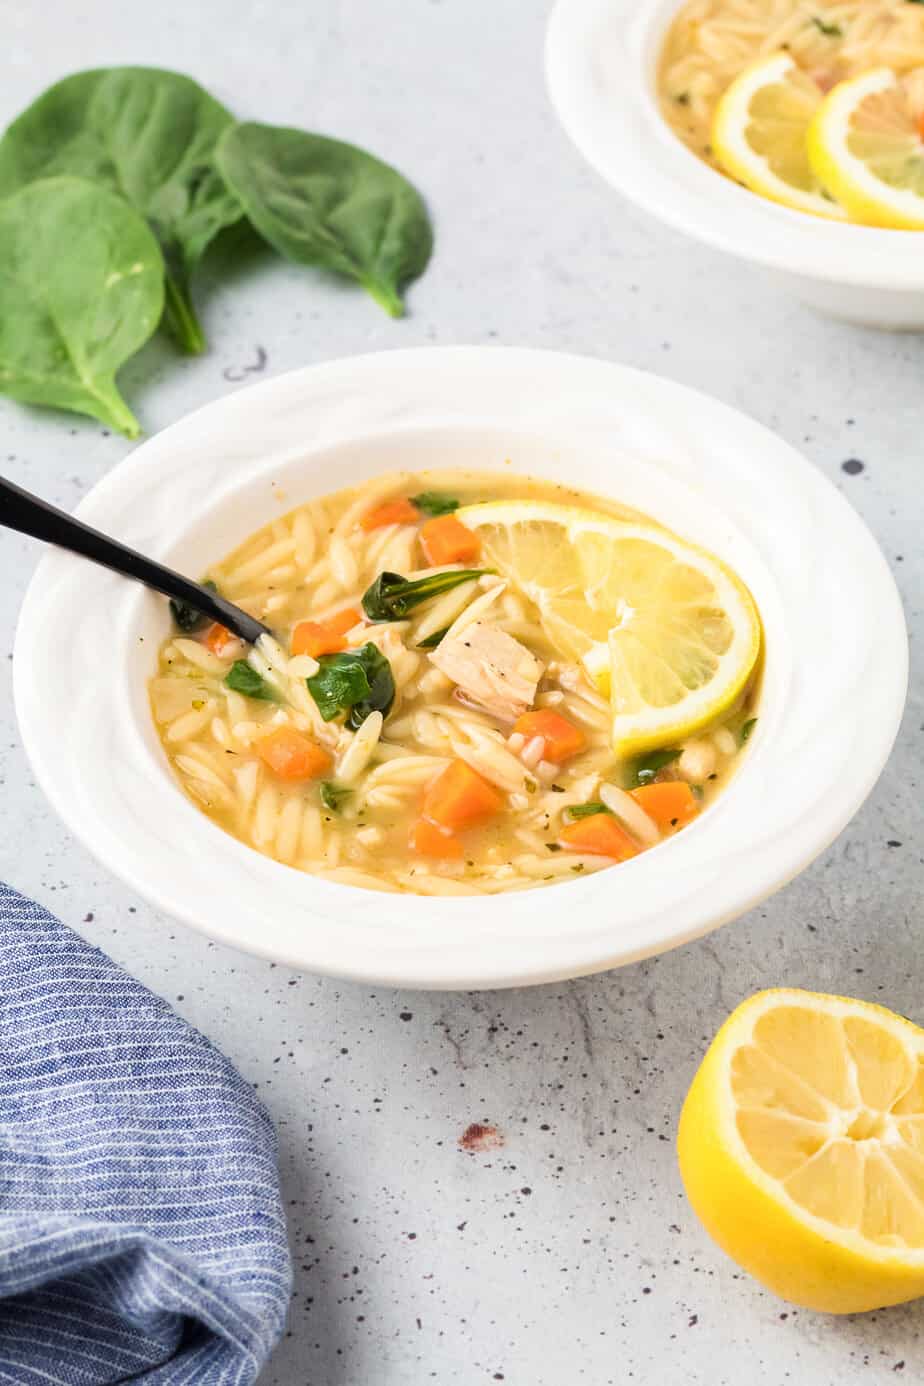 Chicken lemon orzo soup in a bowl from the side with a spoon and a slice of lemon in the bowl.